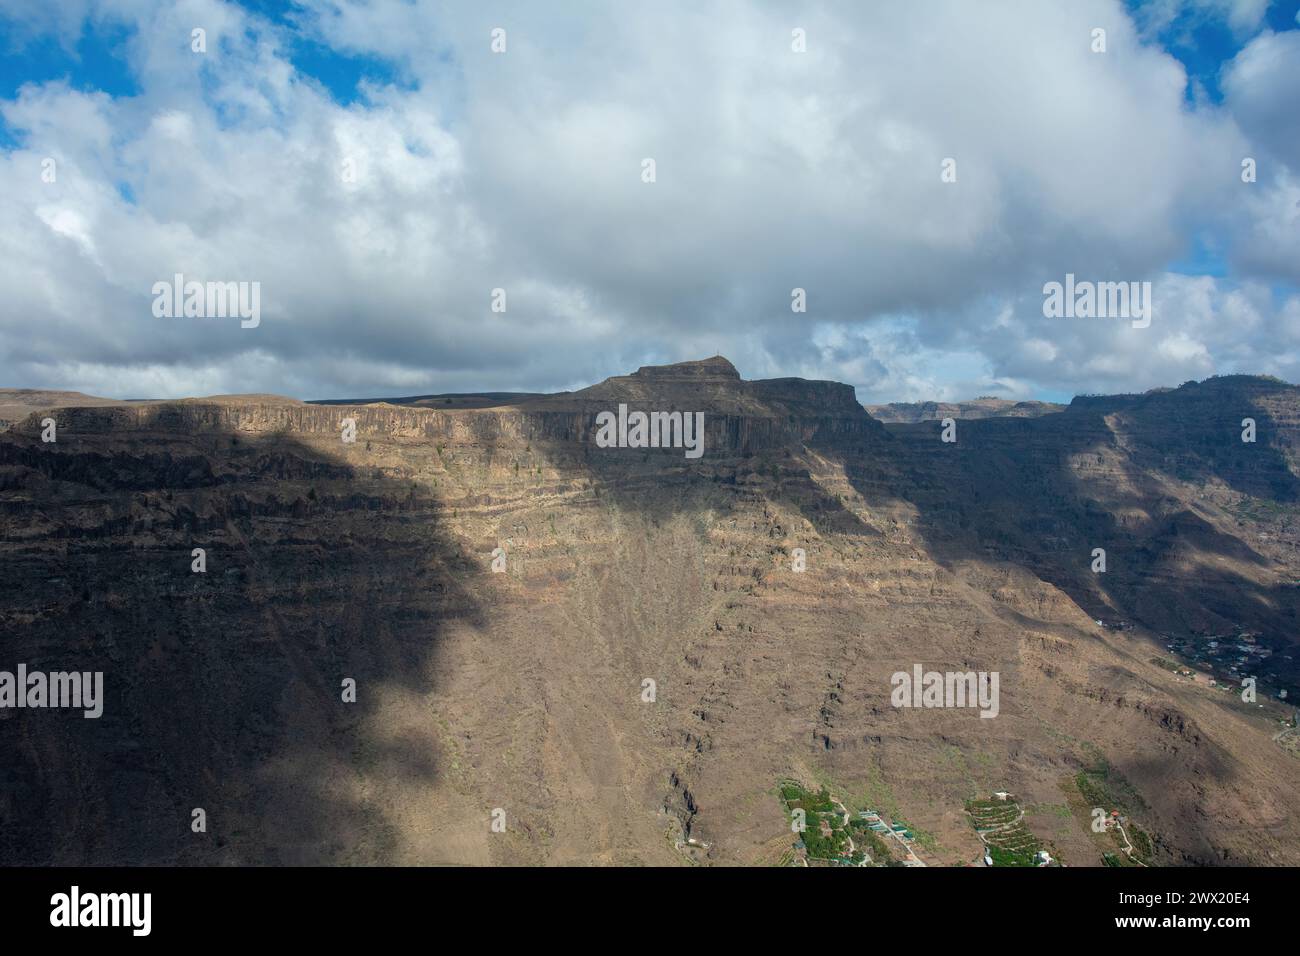 Mountains on the Canary Island of Gran Canaria in Spain, with blue sky and clouds Stock Photo